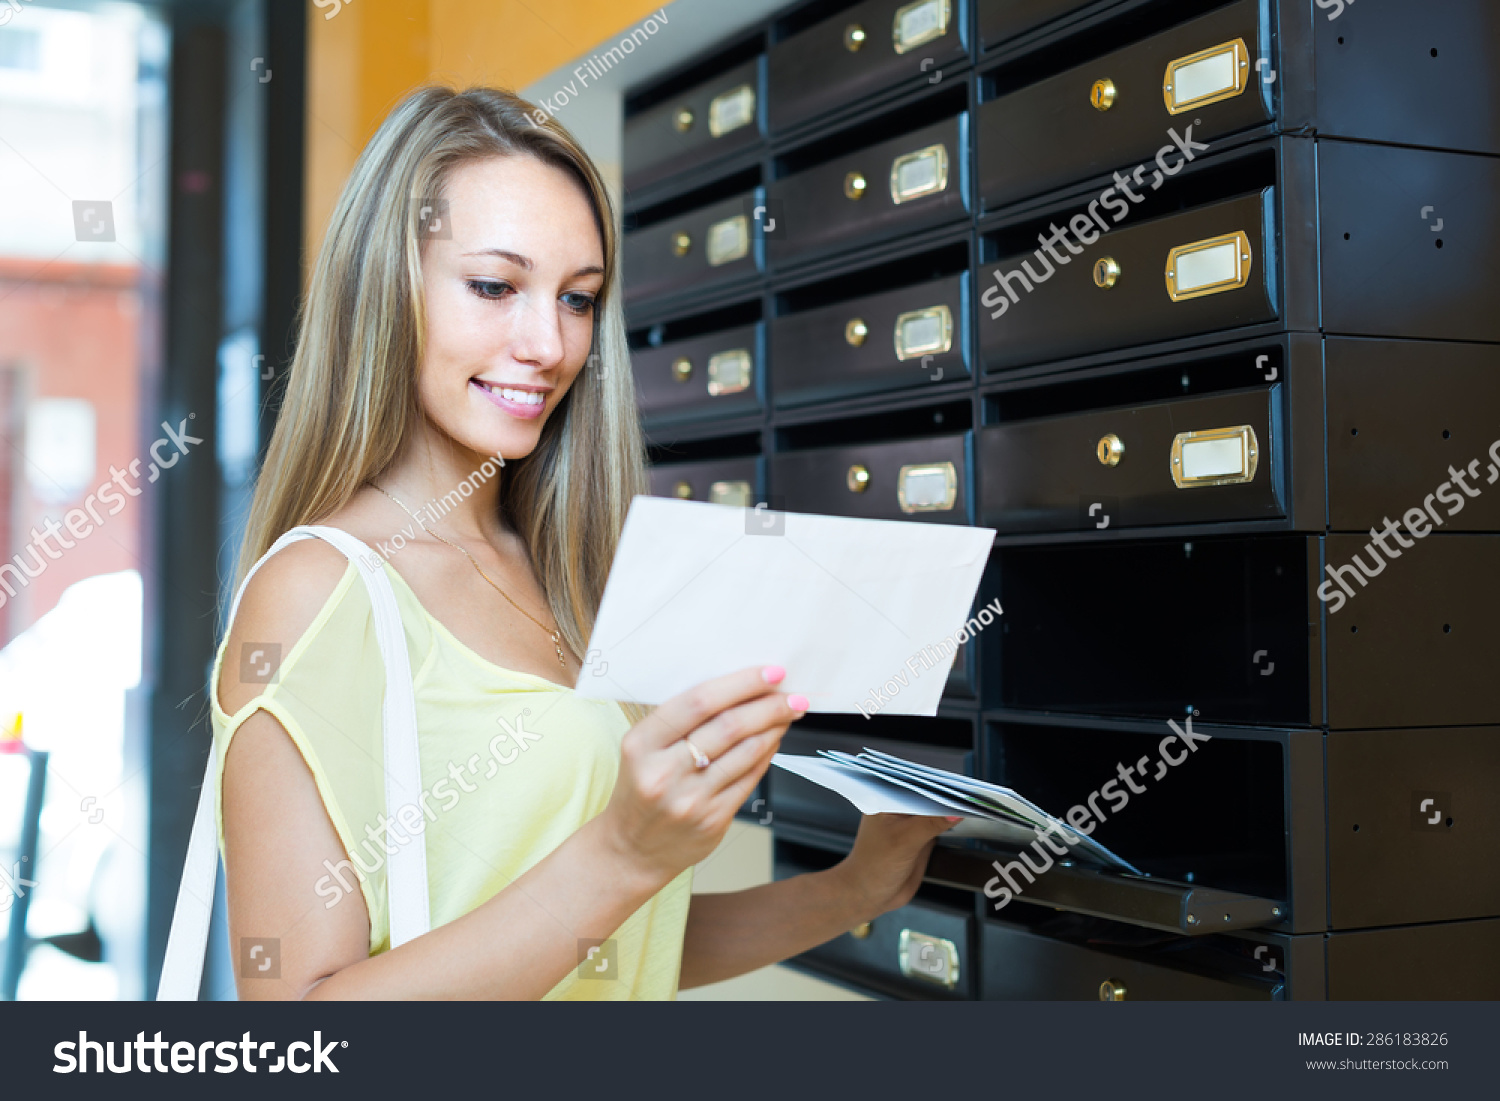 Smiling girl taking junk mail out the posting box #286183826